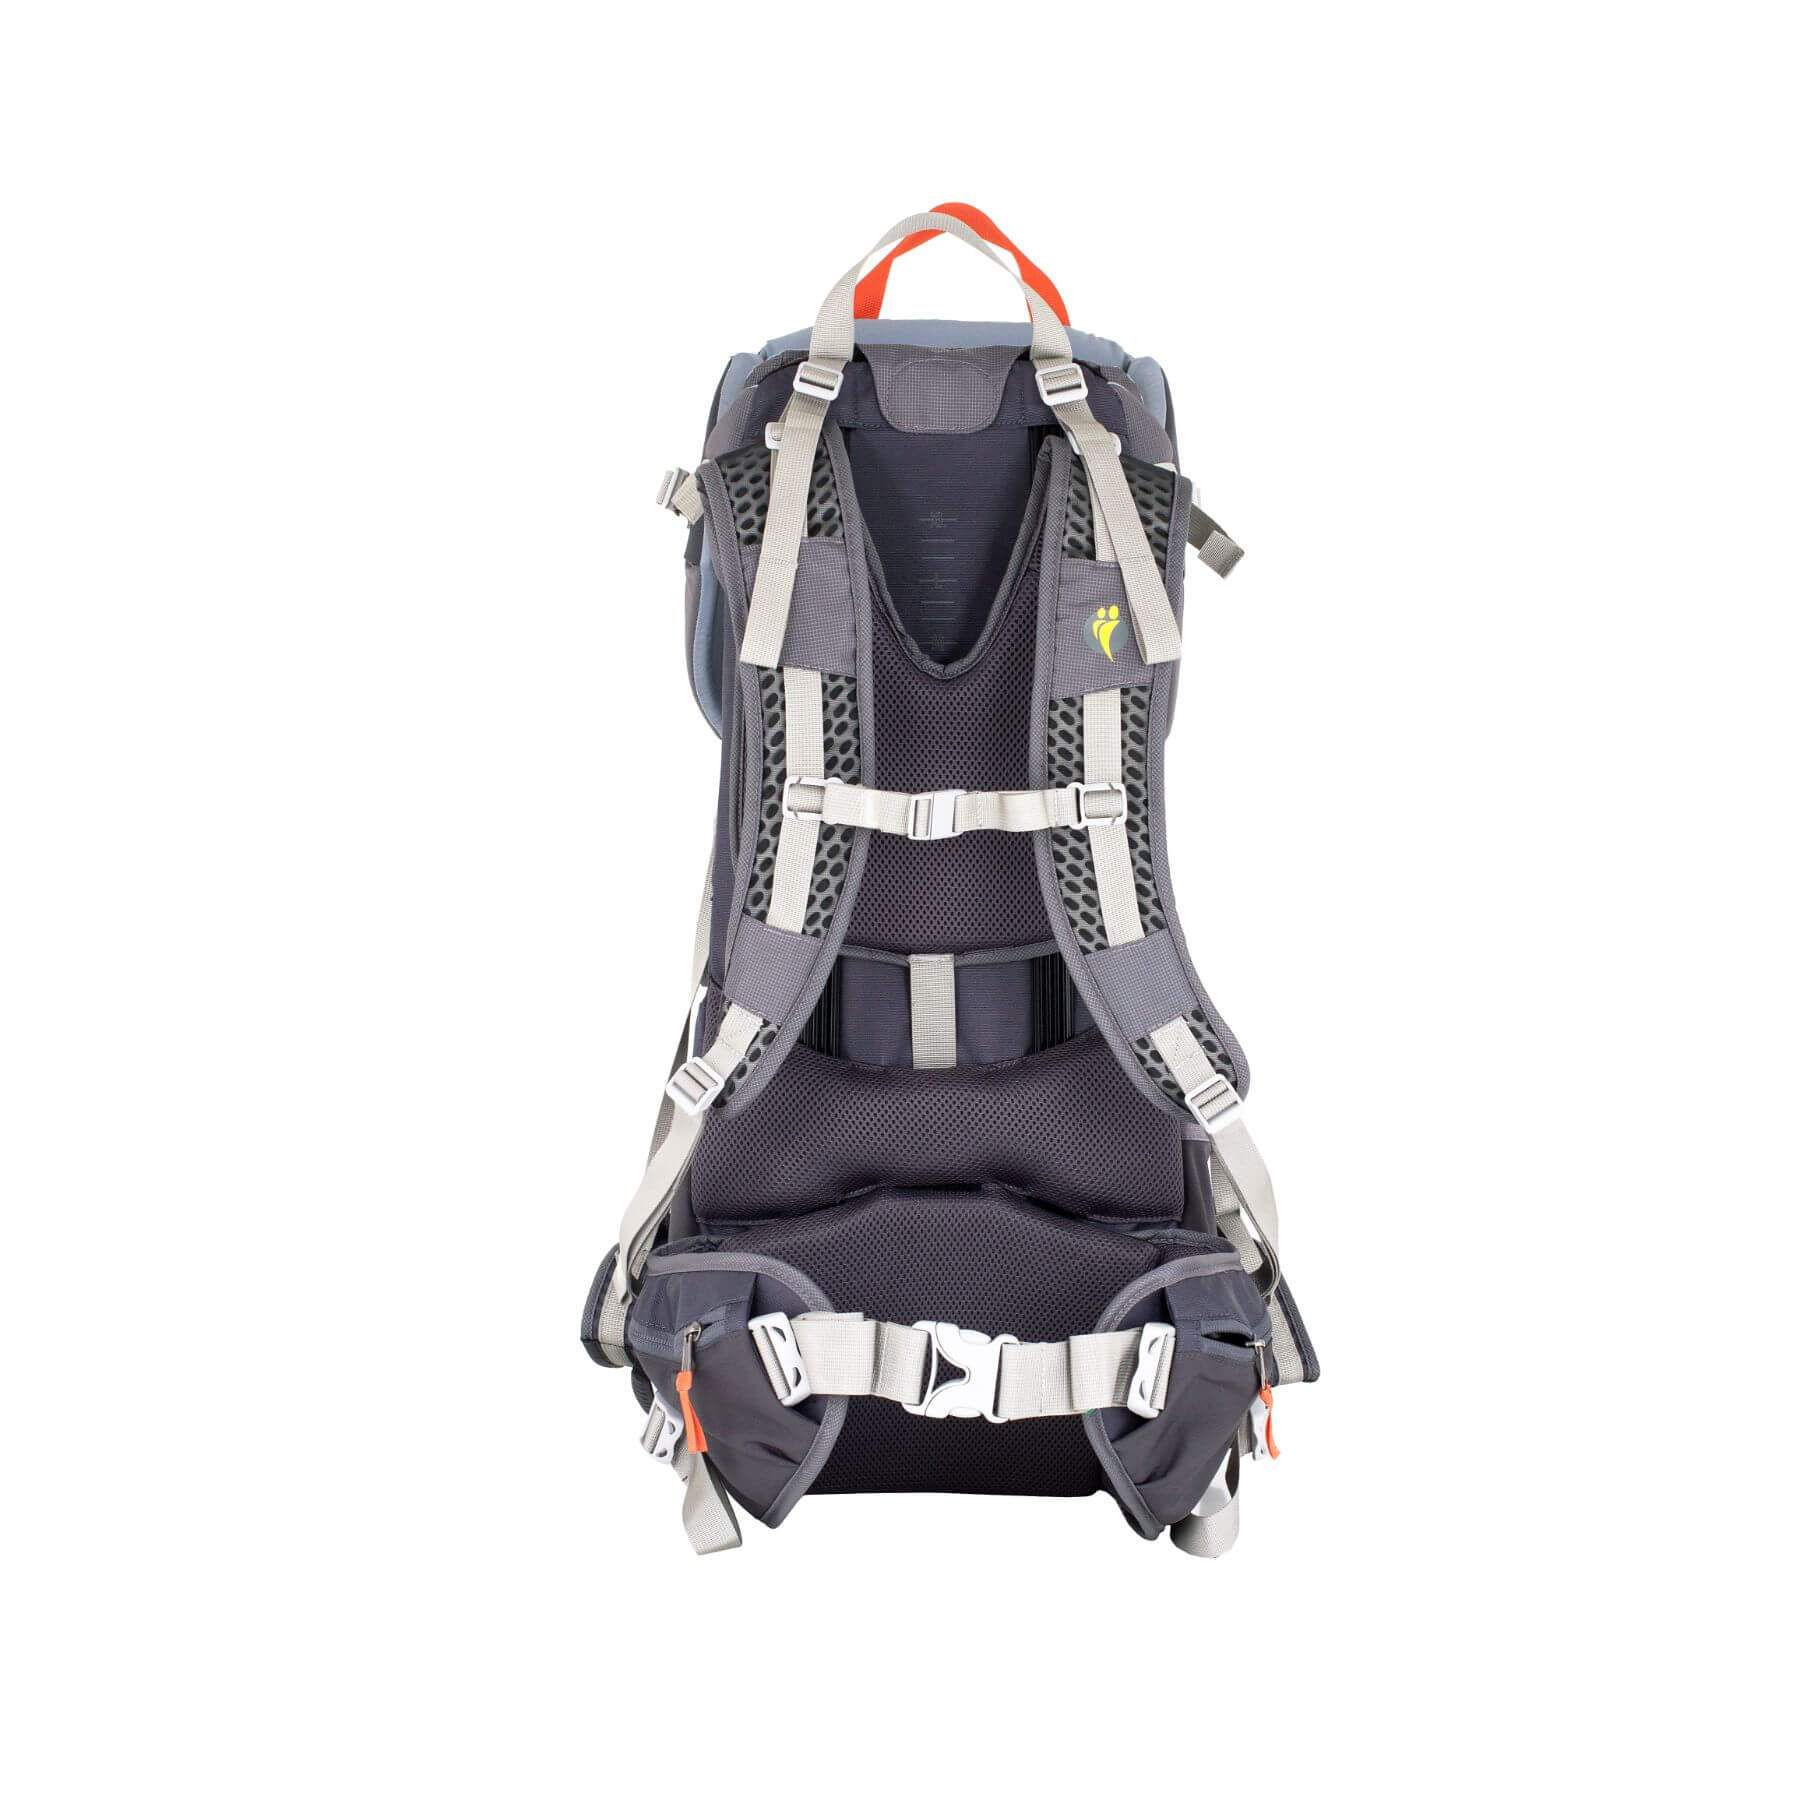 littlelife cross country s4 child carrier